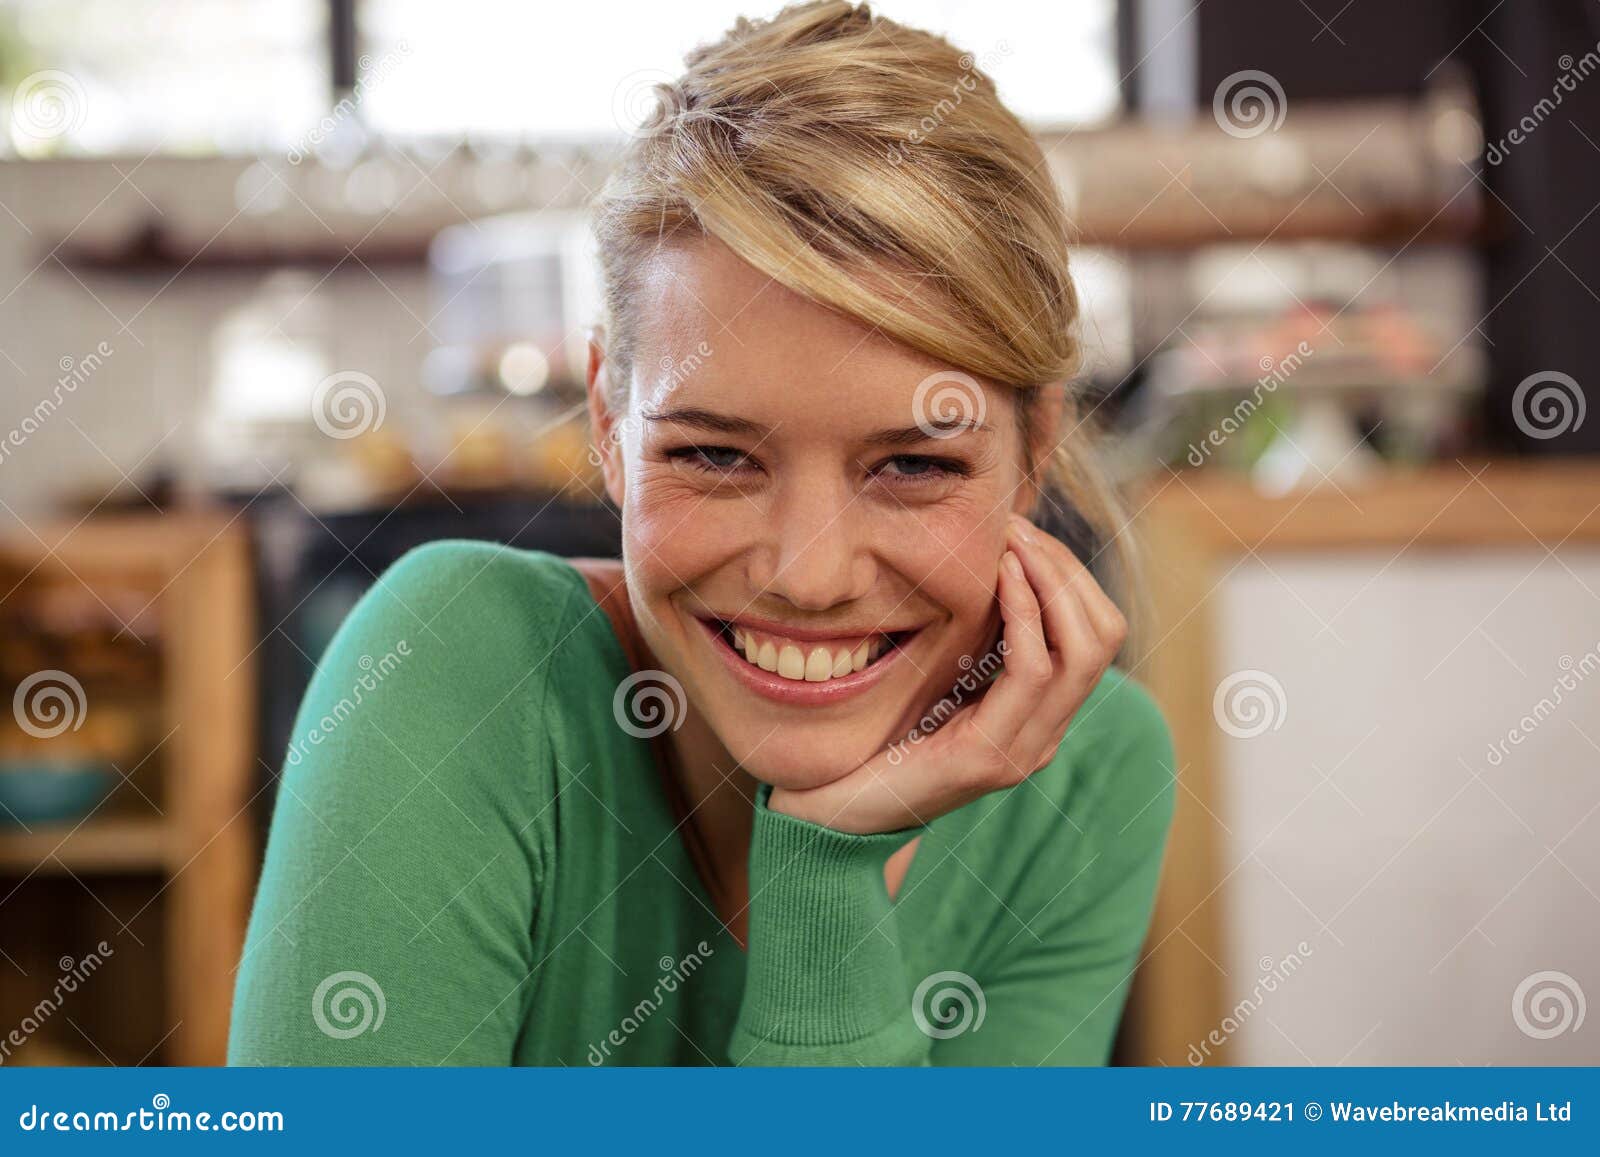 Woman Smiling At Camera Sitting And Smiling Stock Image Image Of Fashionable Food 77689421